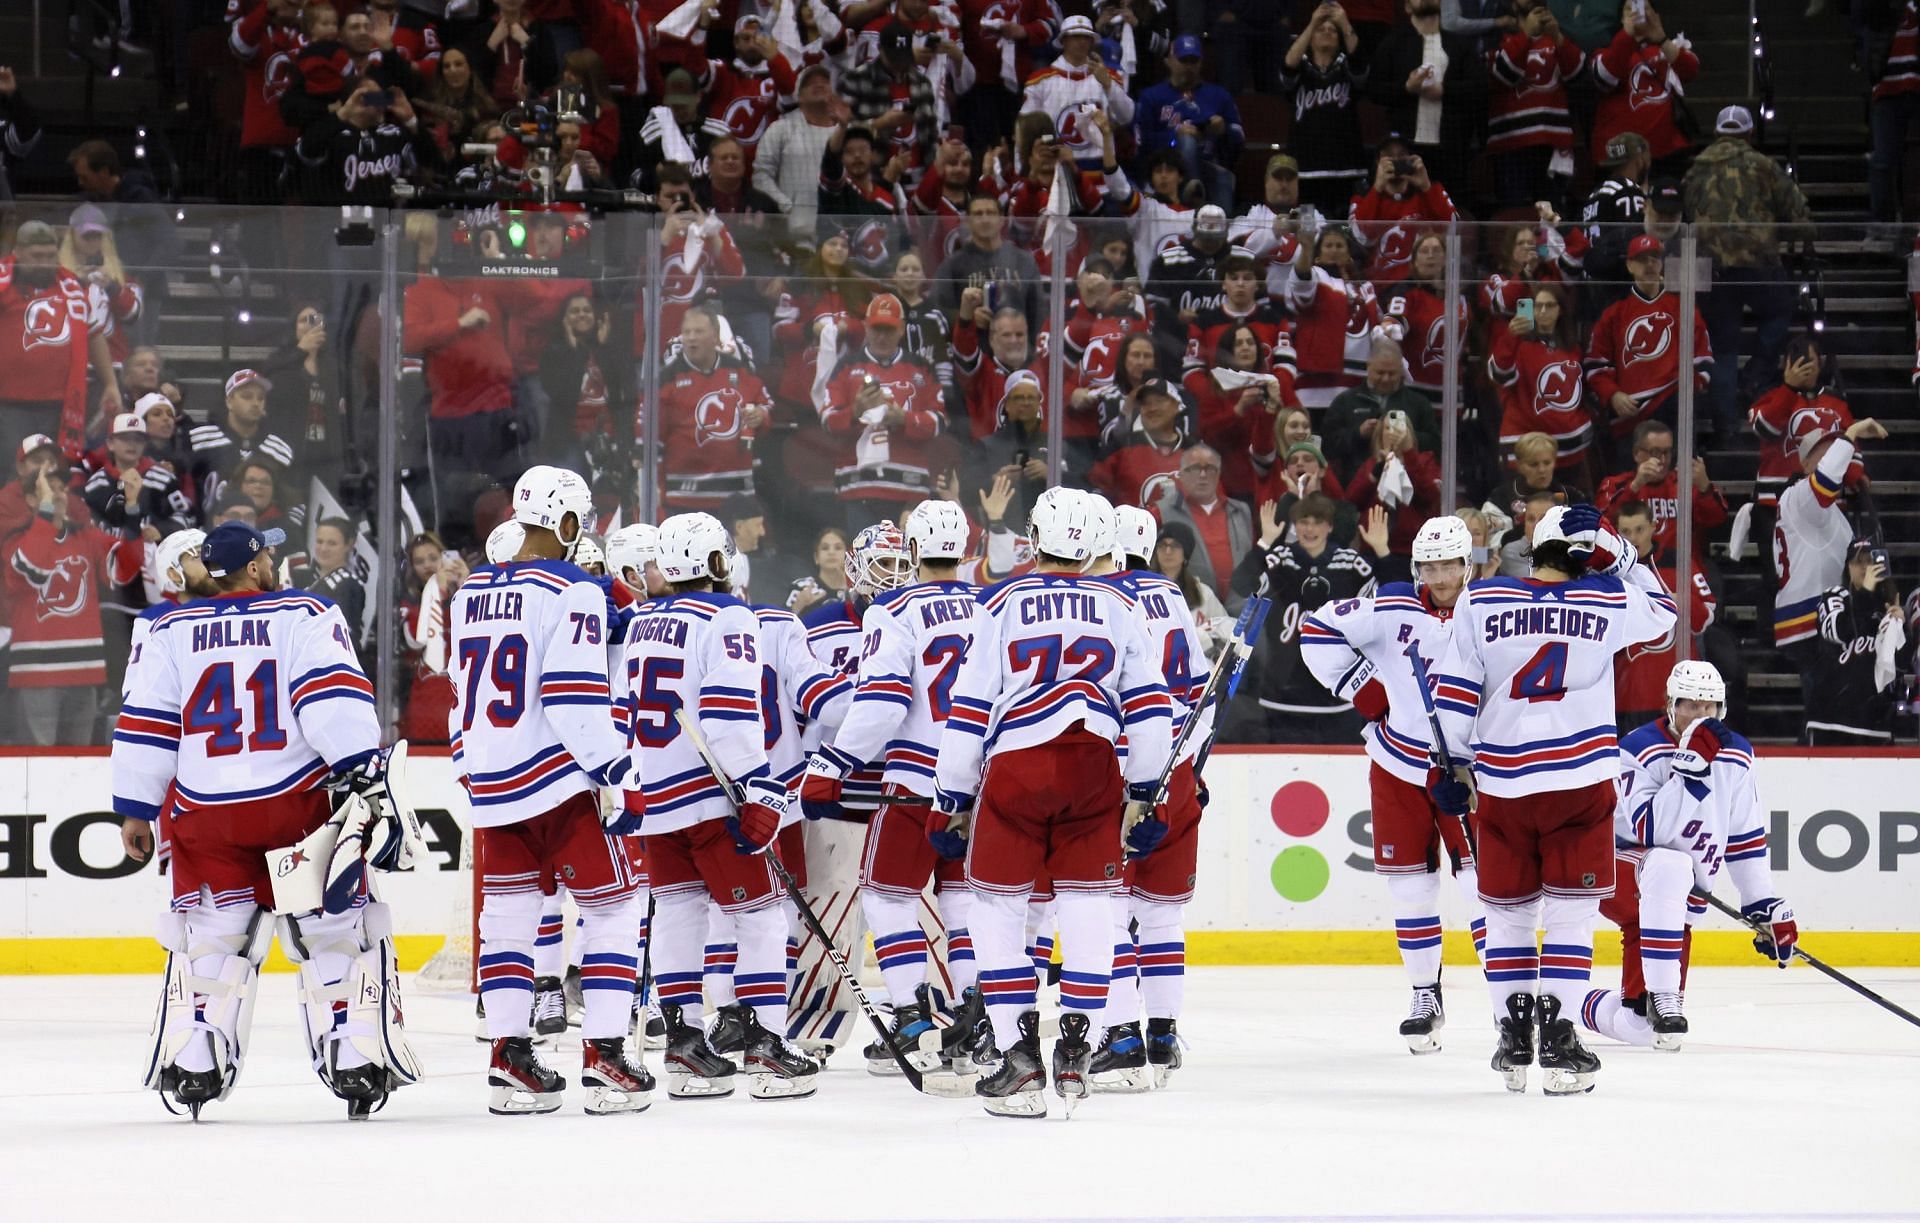 With Fans in the Stands, New Jersey Devils Fall to the New York